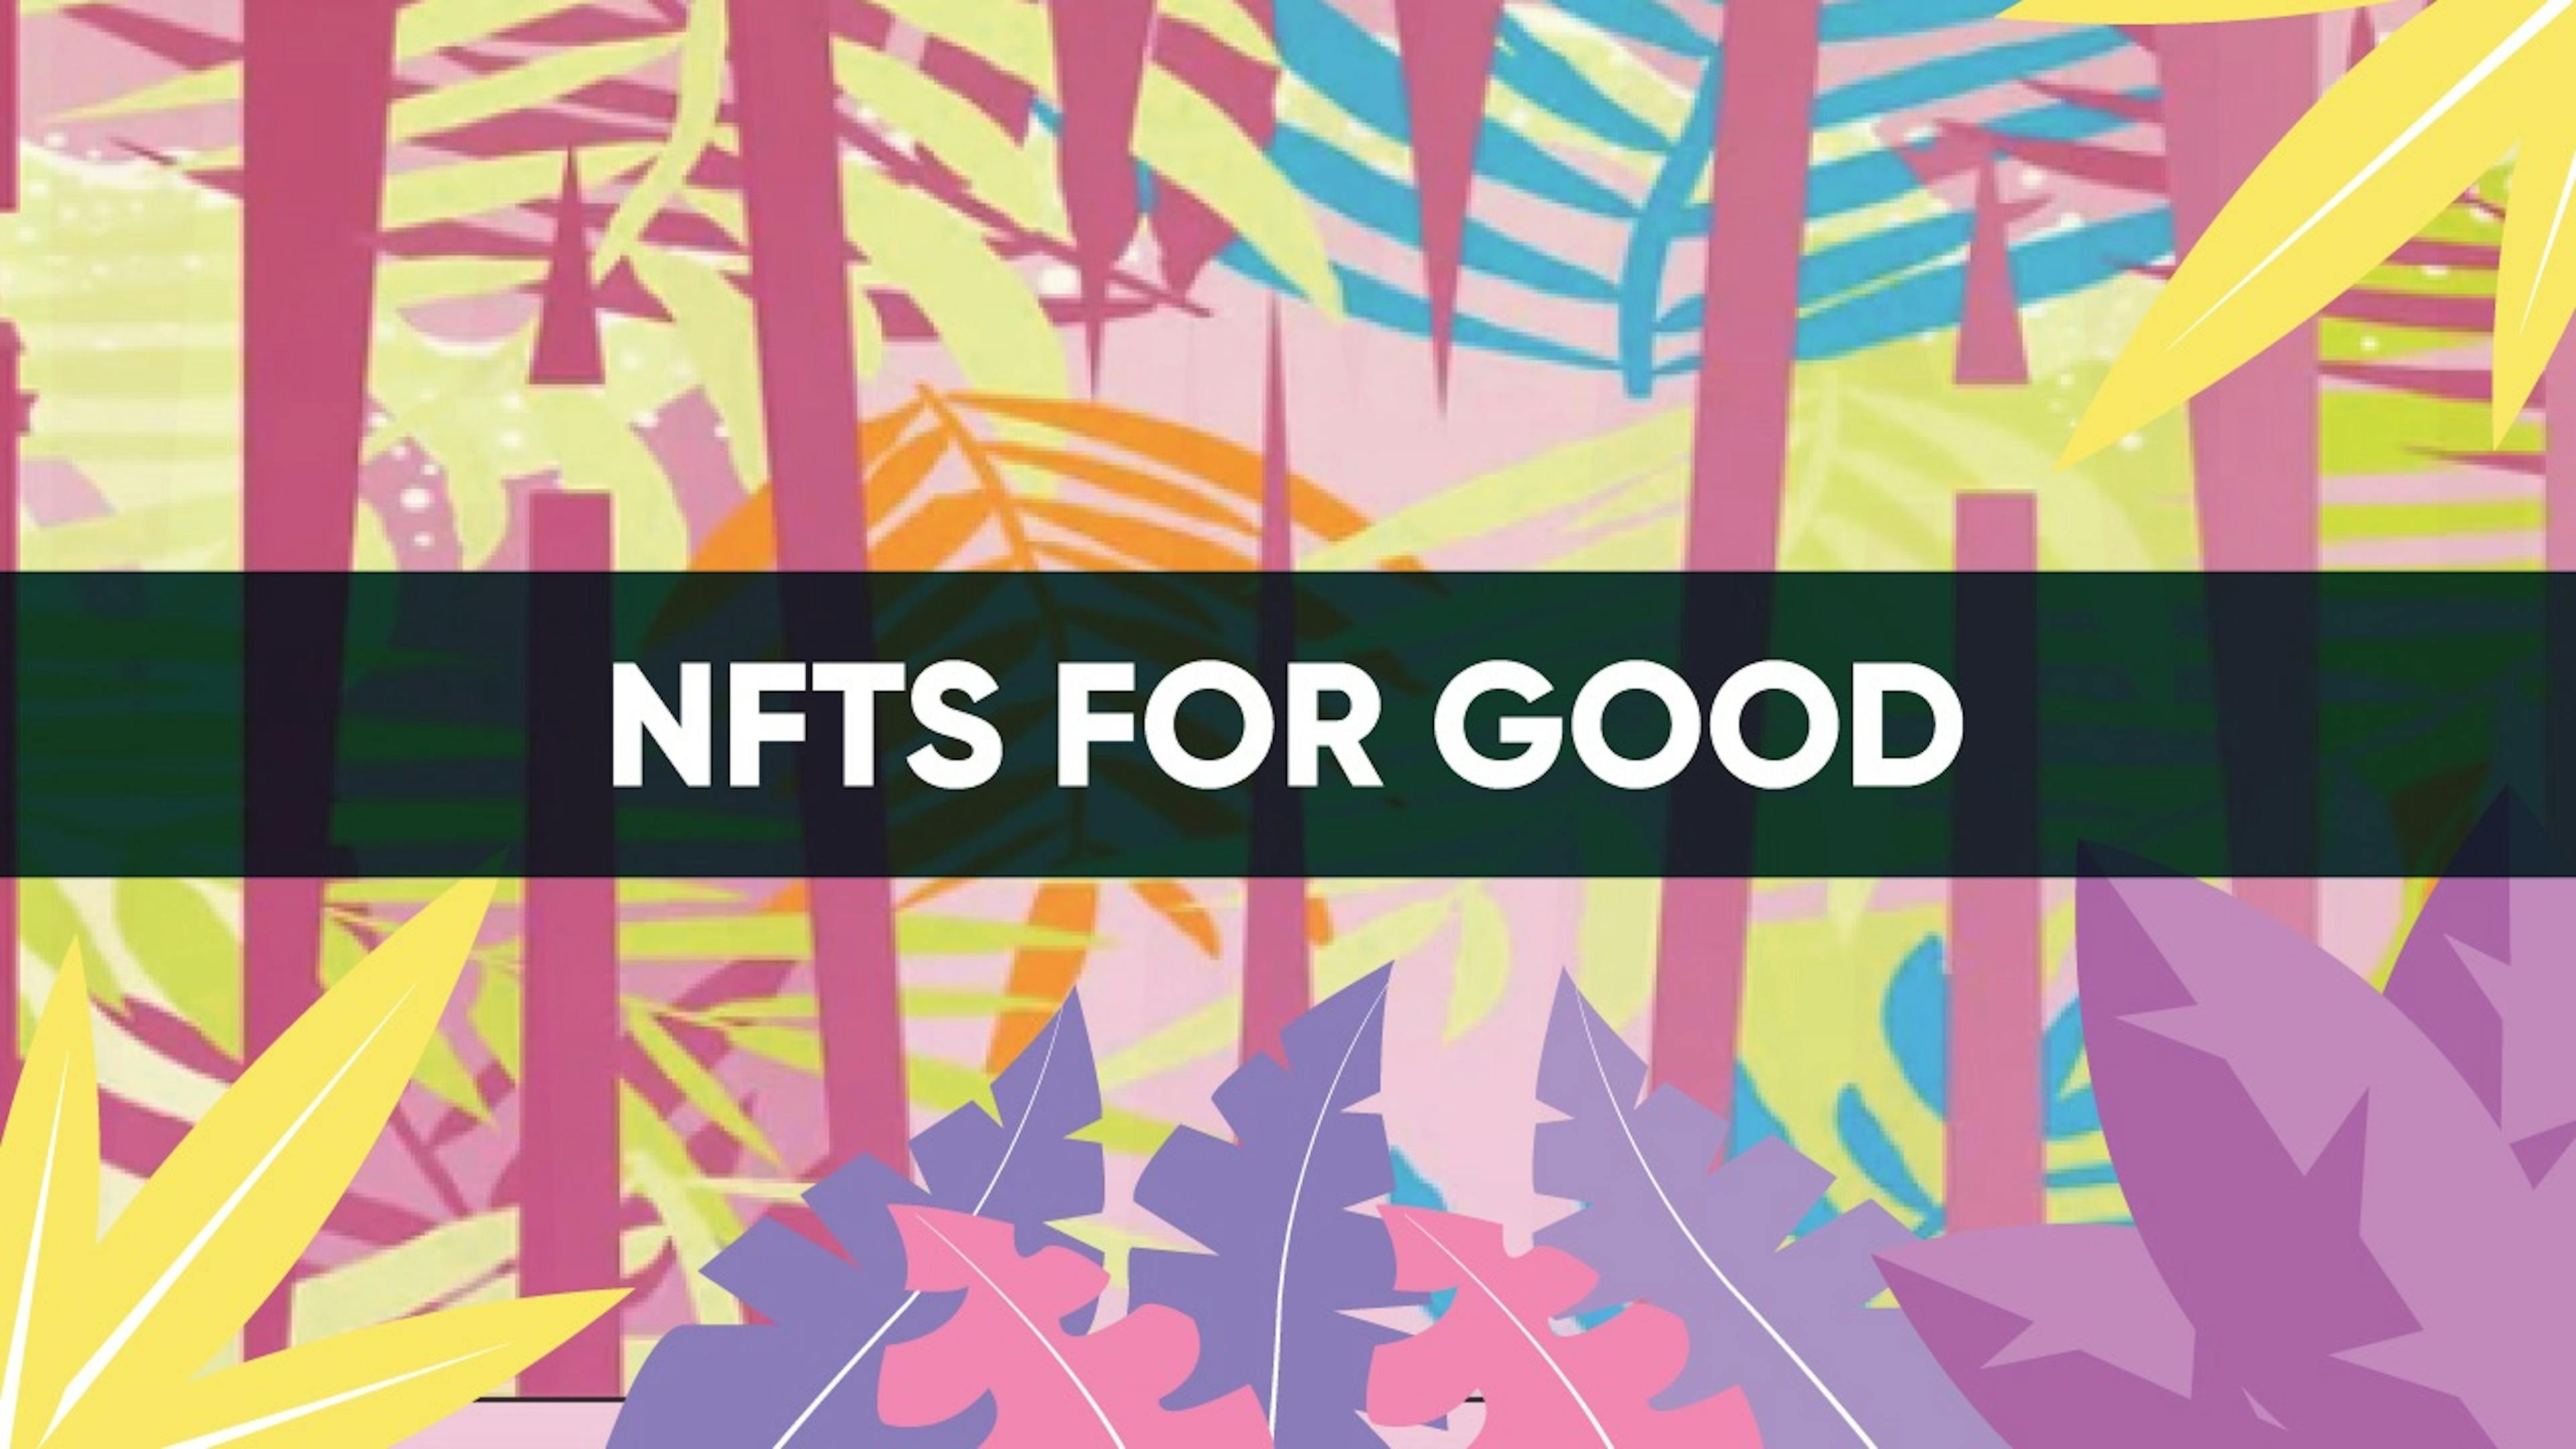 featured image - 3 NFT Projects that Look Beyond Profits and Fight for a Better World